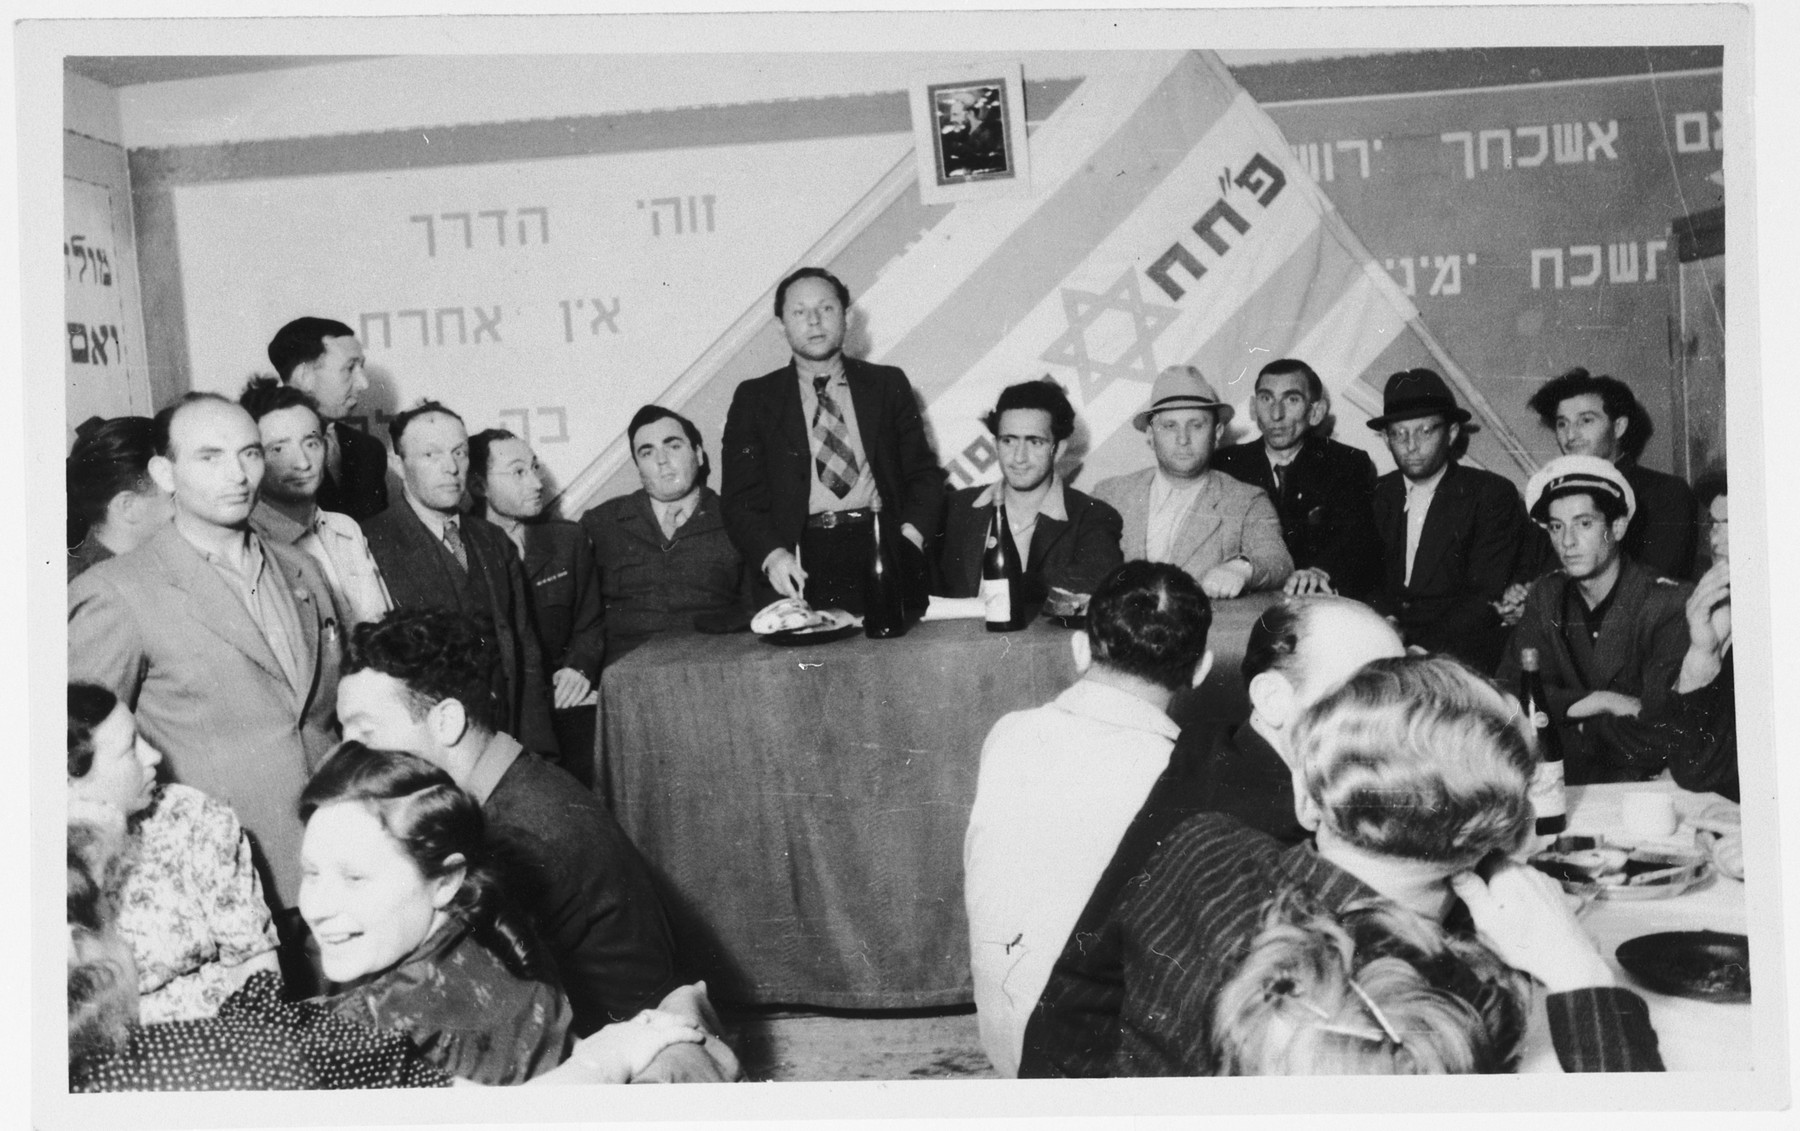 Members of the Zionist group Partizanim-Hayyalim-Halutzim meet in the Zeilsheim displaced persons' camp held in a room decorated with a flag and posters.